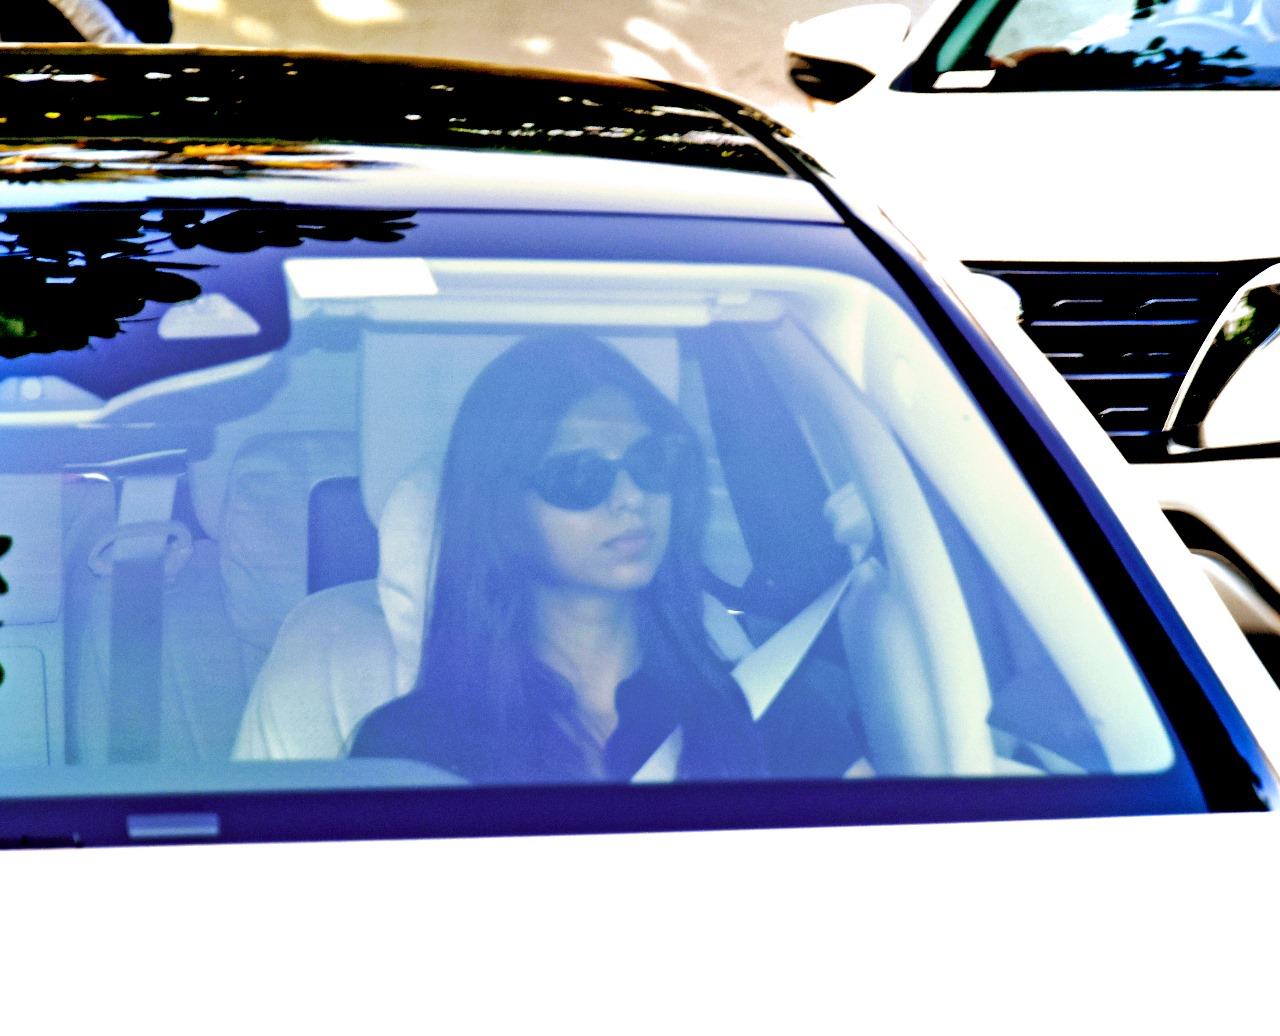 Suhana Khan was spotted in her car today. The Archies star was out and about in the city!